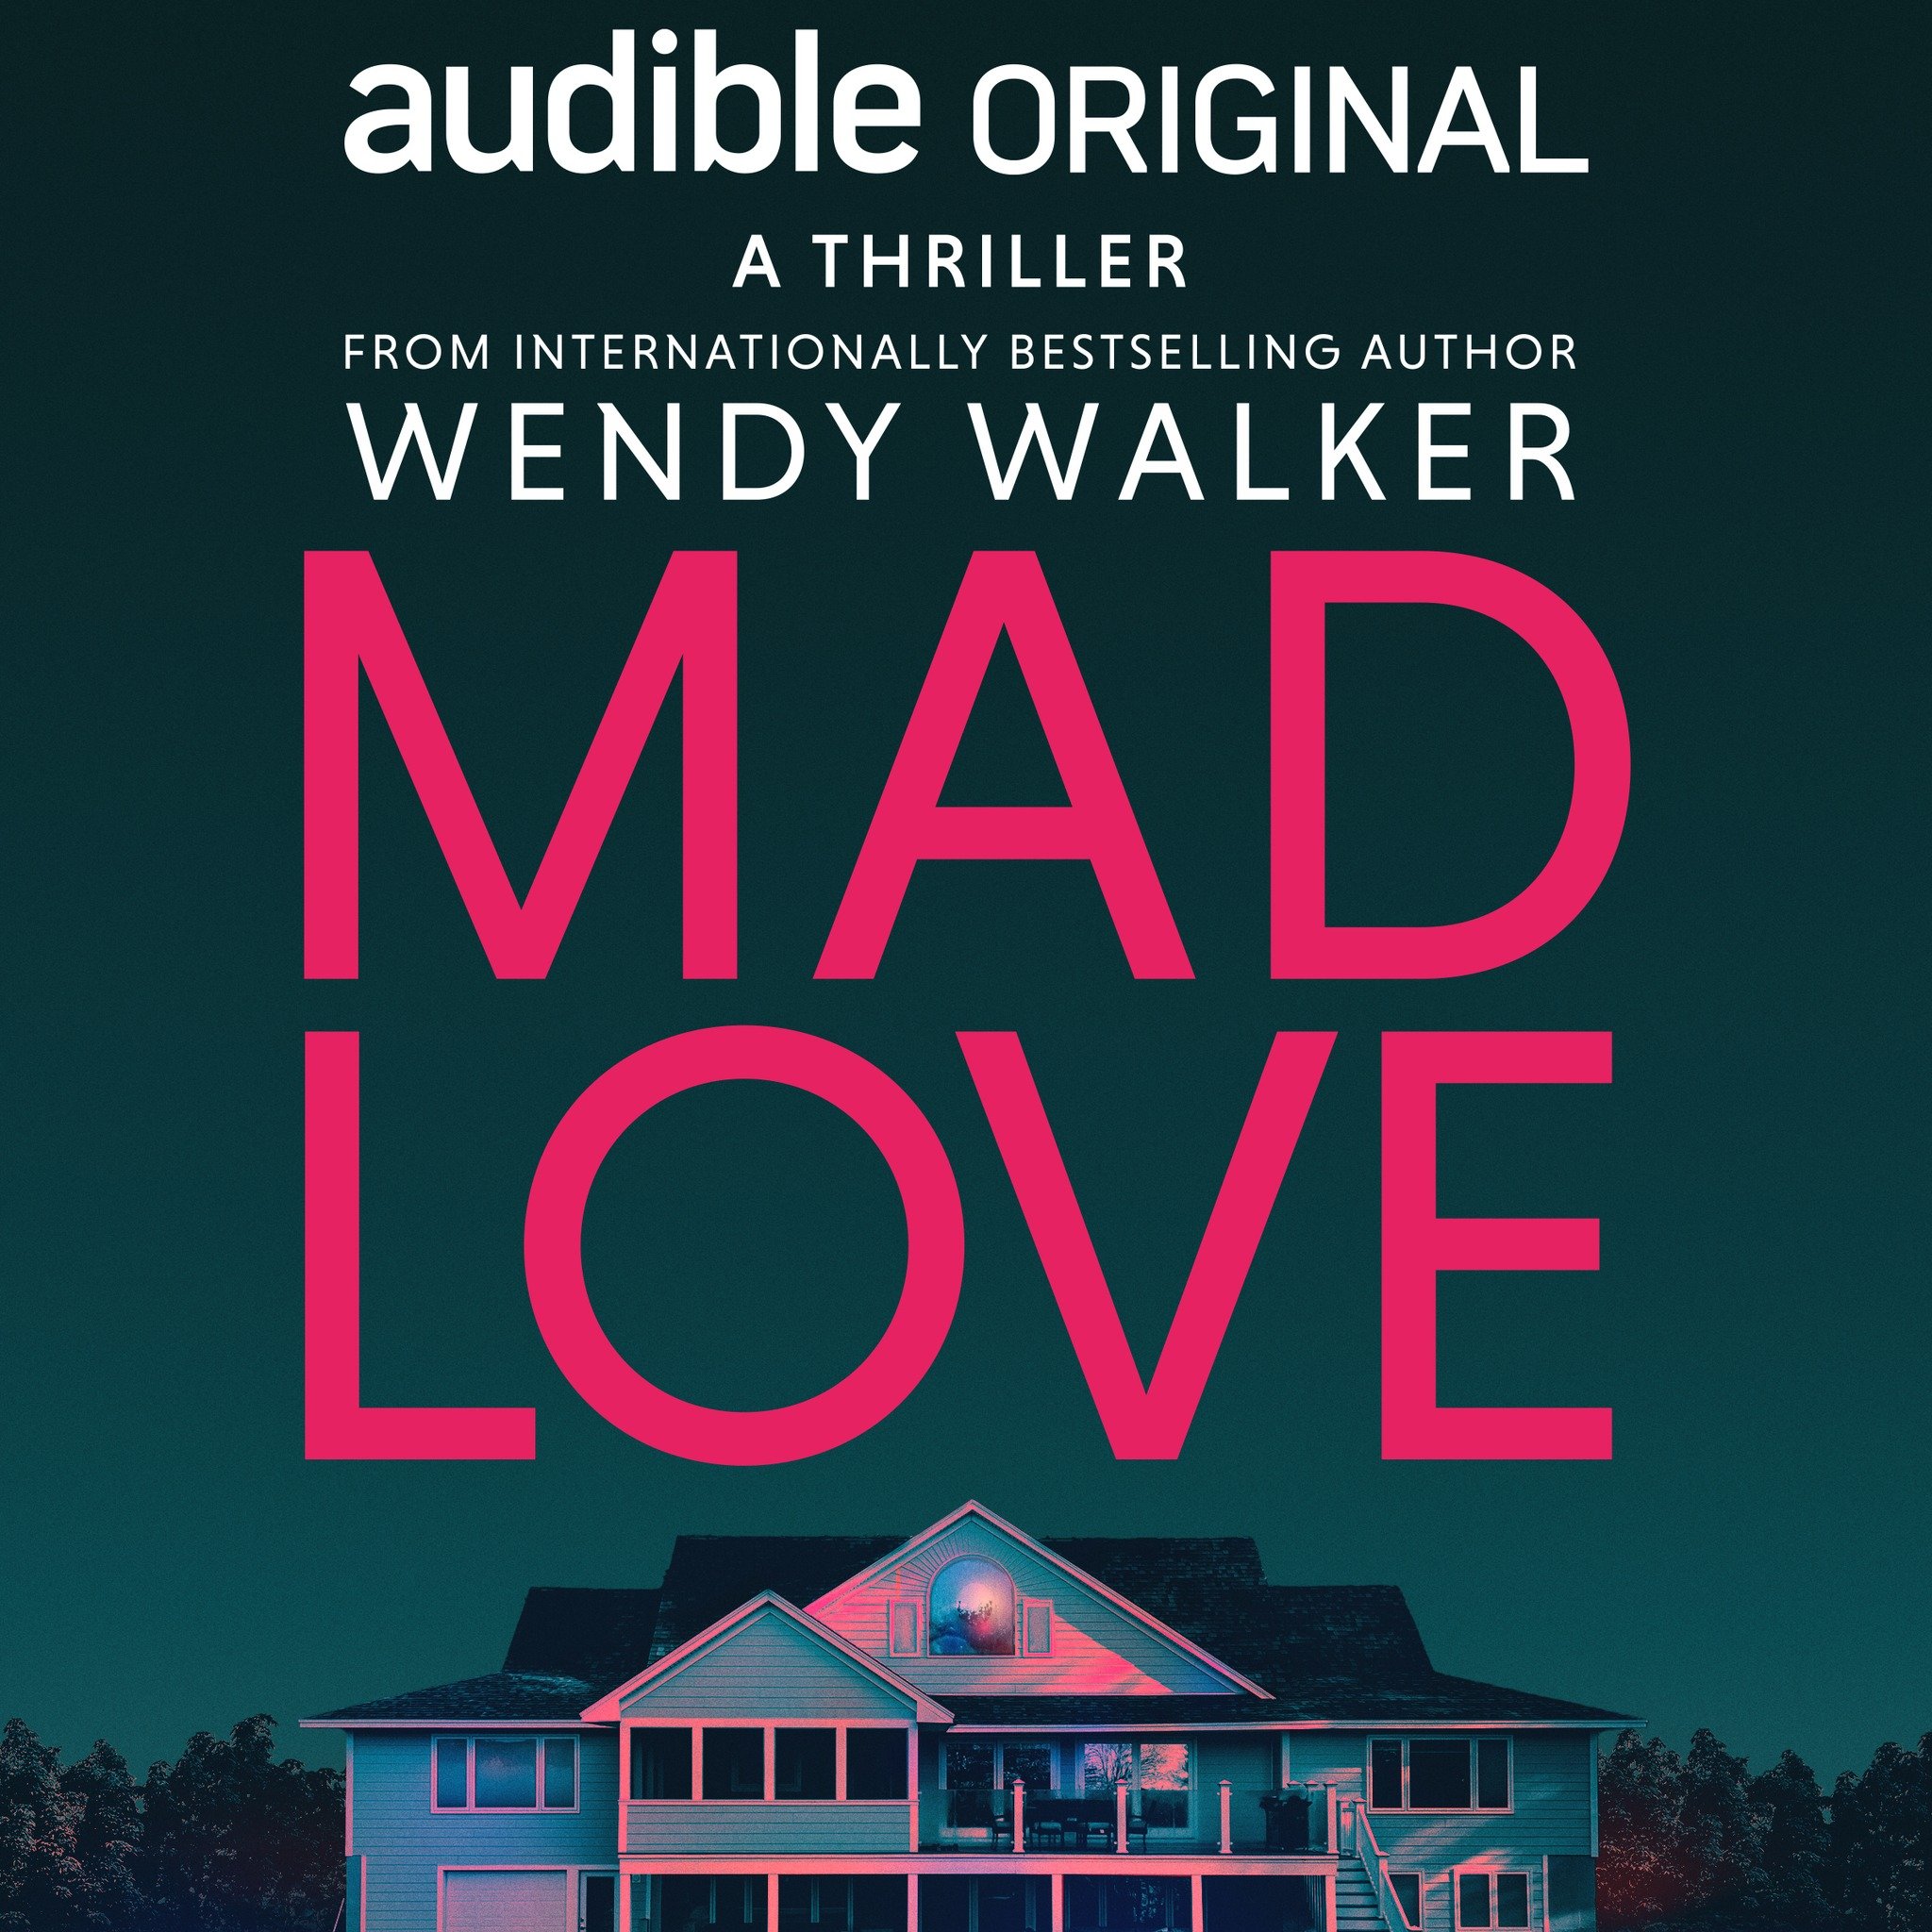 @wendywalkerauthor's Audible Original MAD LOVE is now out -- a twisty tale of obsessive love and murder in a small CT town, narrated by Julia Whelan, with a full cast of actors including Alexis Bledel (Gilmore Girls/Handmaid's Tale), Renee Elise Gold